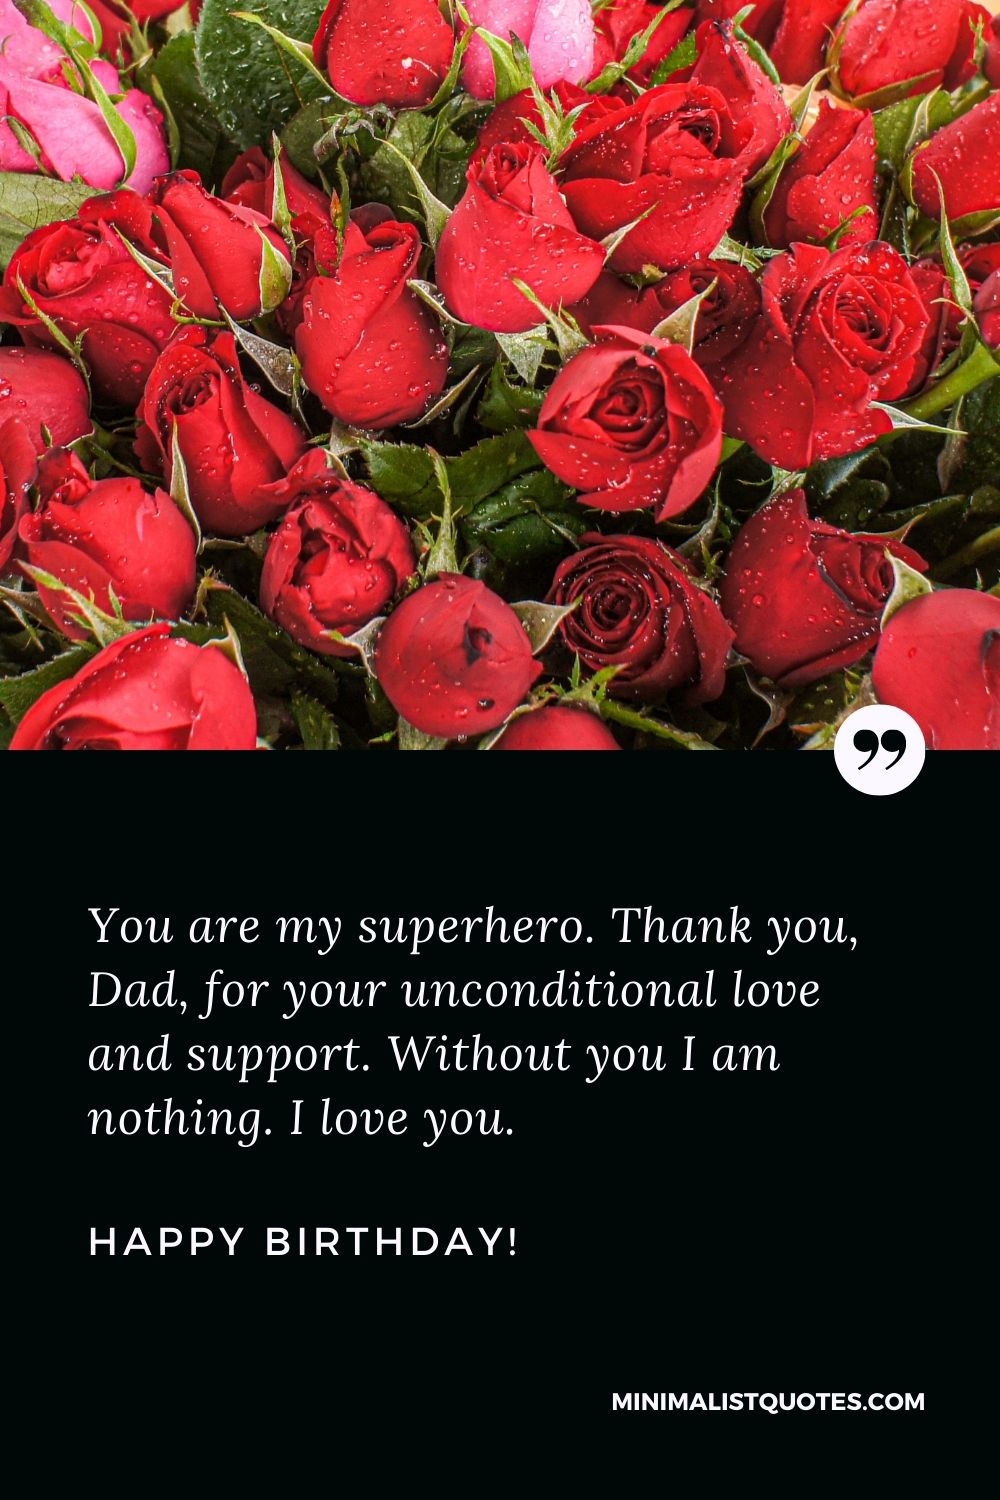 Happy birthday dad: You are my superhero. Thank you, Dad, for your unconditional love and support. Without you I am nothing. I love you. Happy Birthday!